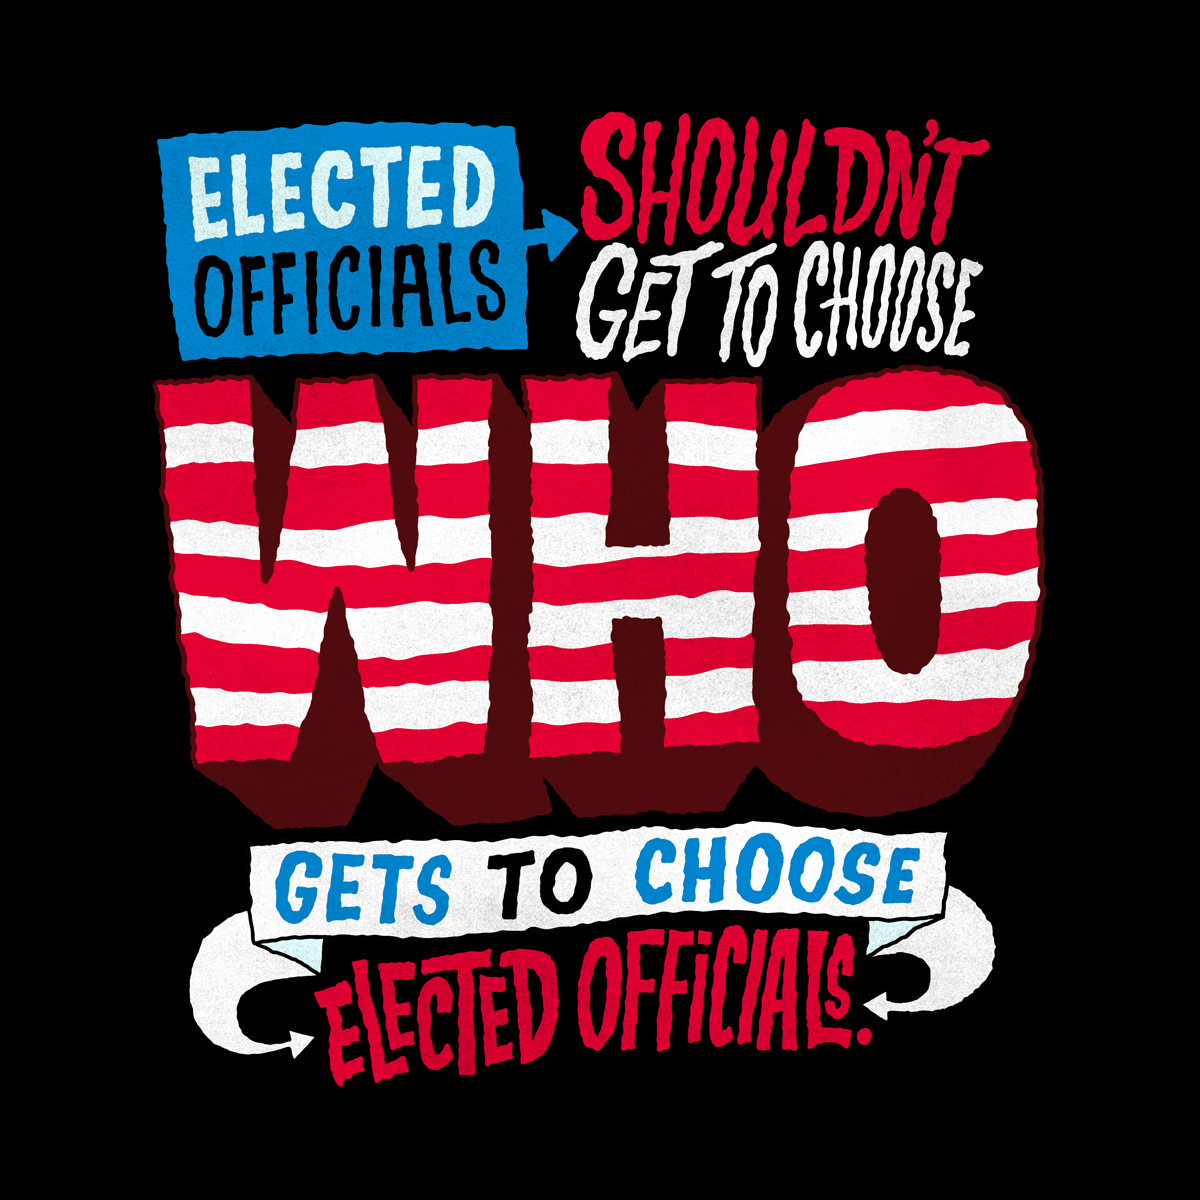 Elected officials shouldn't get to choose who gets to choose elected officials